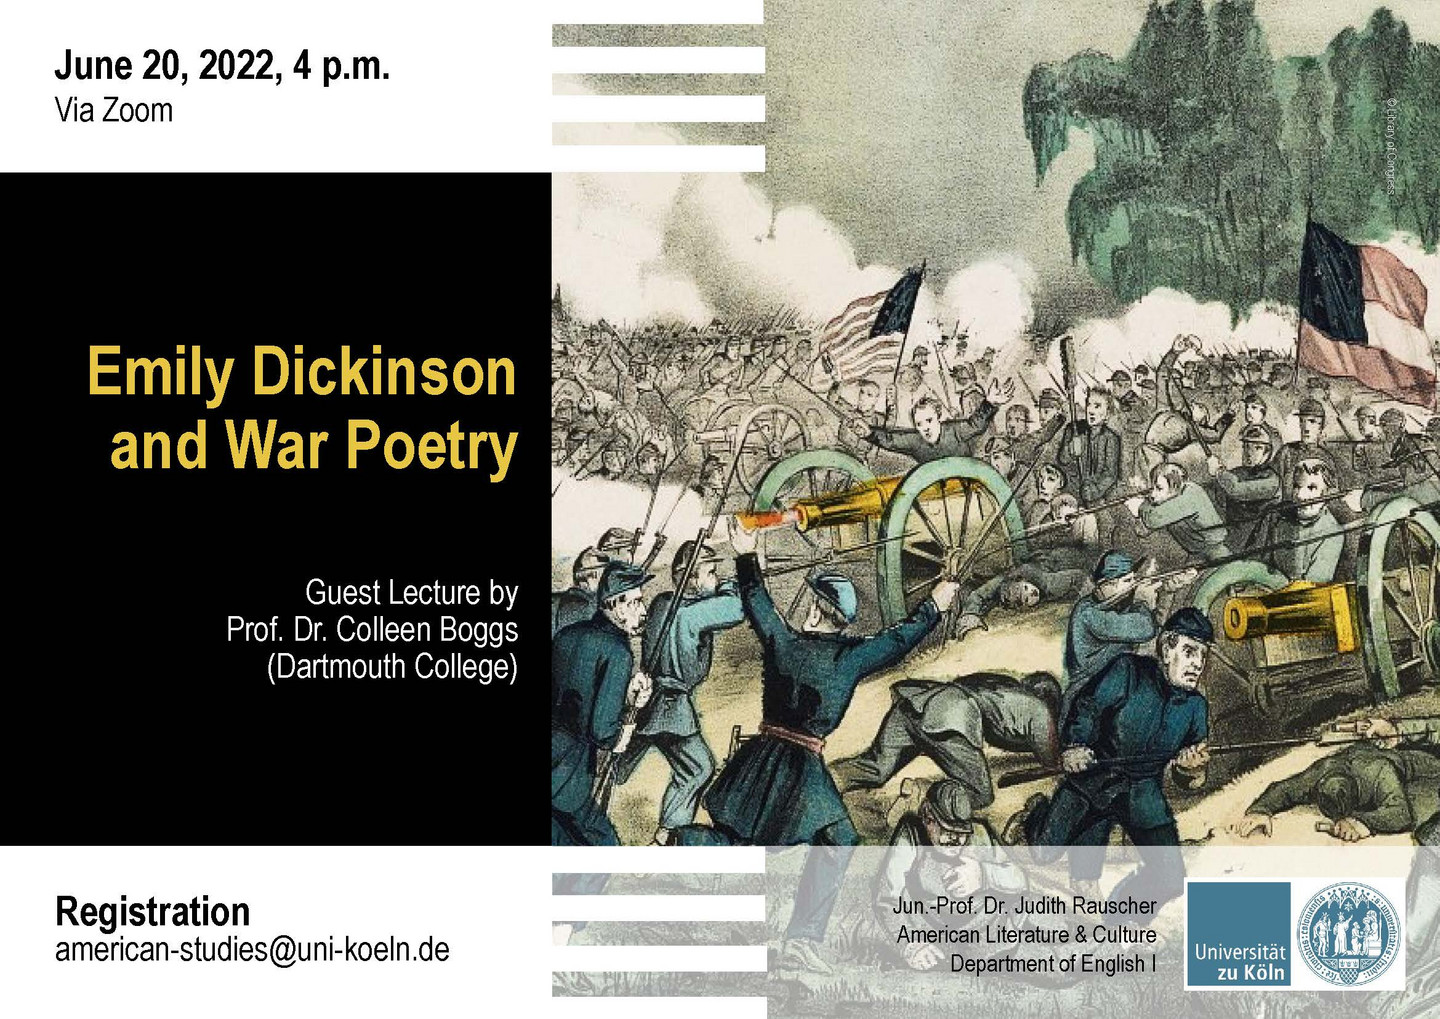 Poster for the Guest Lecture "Emily Dickinson and War Poetry" featuring a painted scene of the Battle of Gettysburg